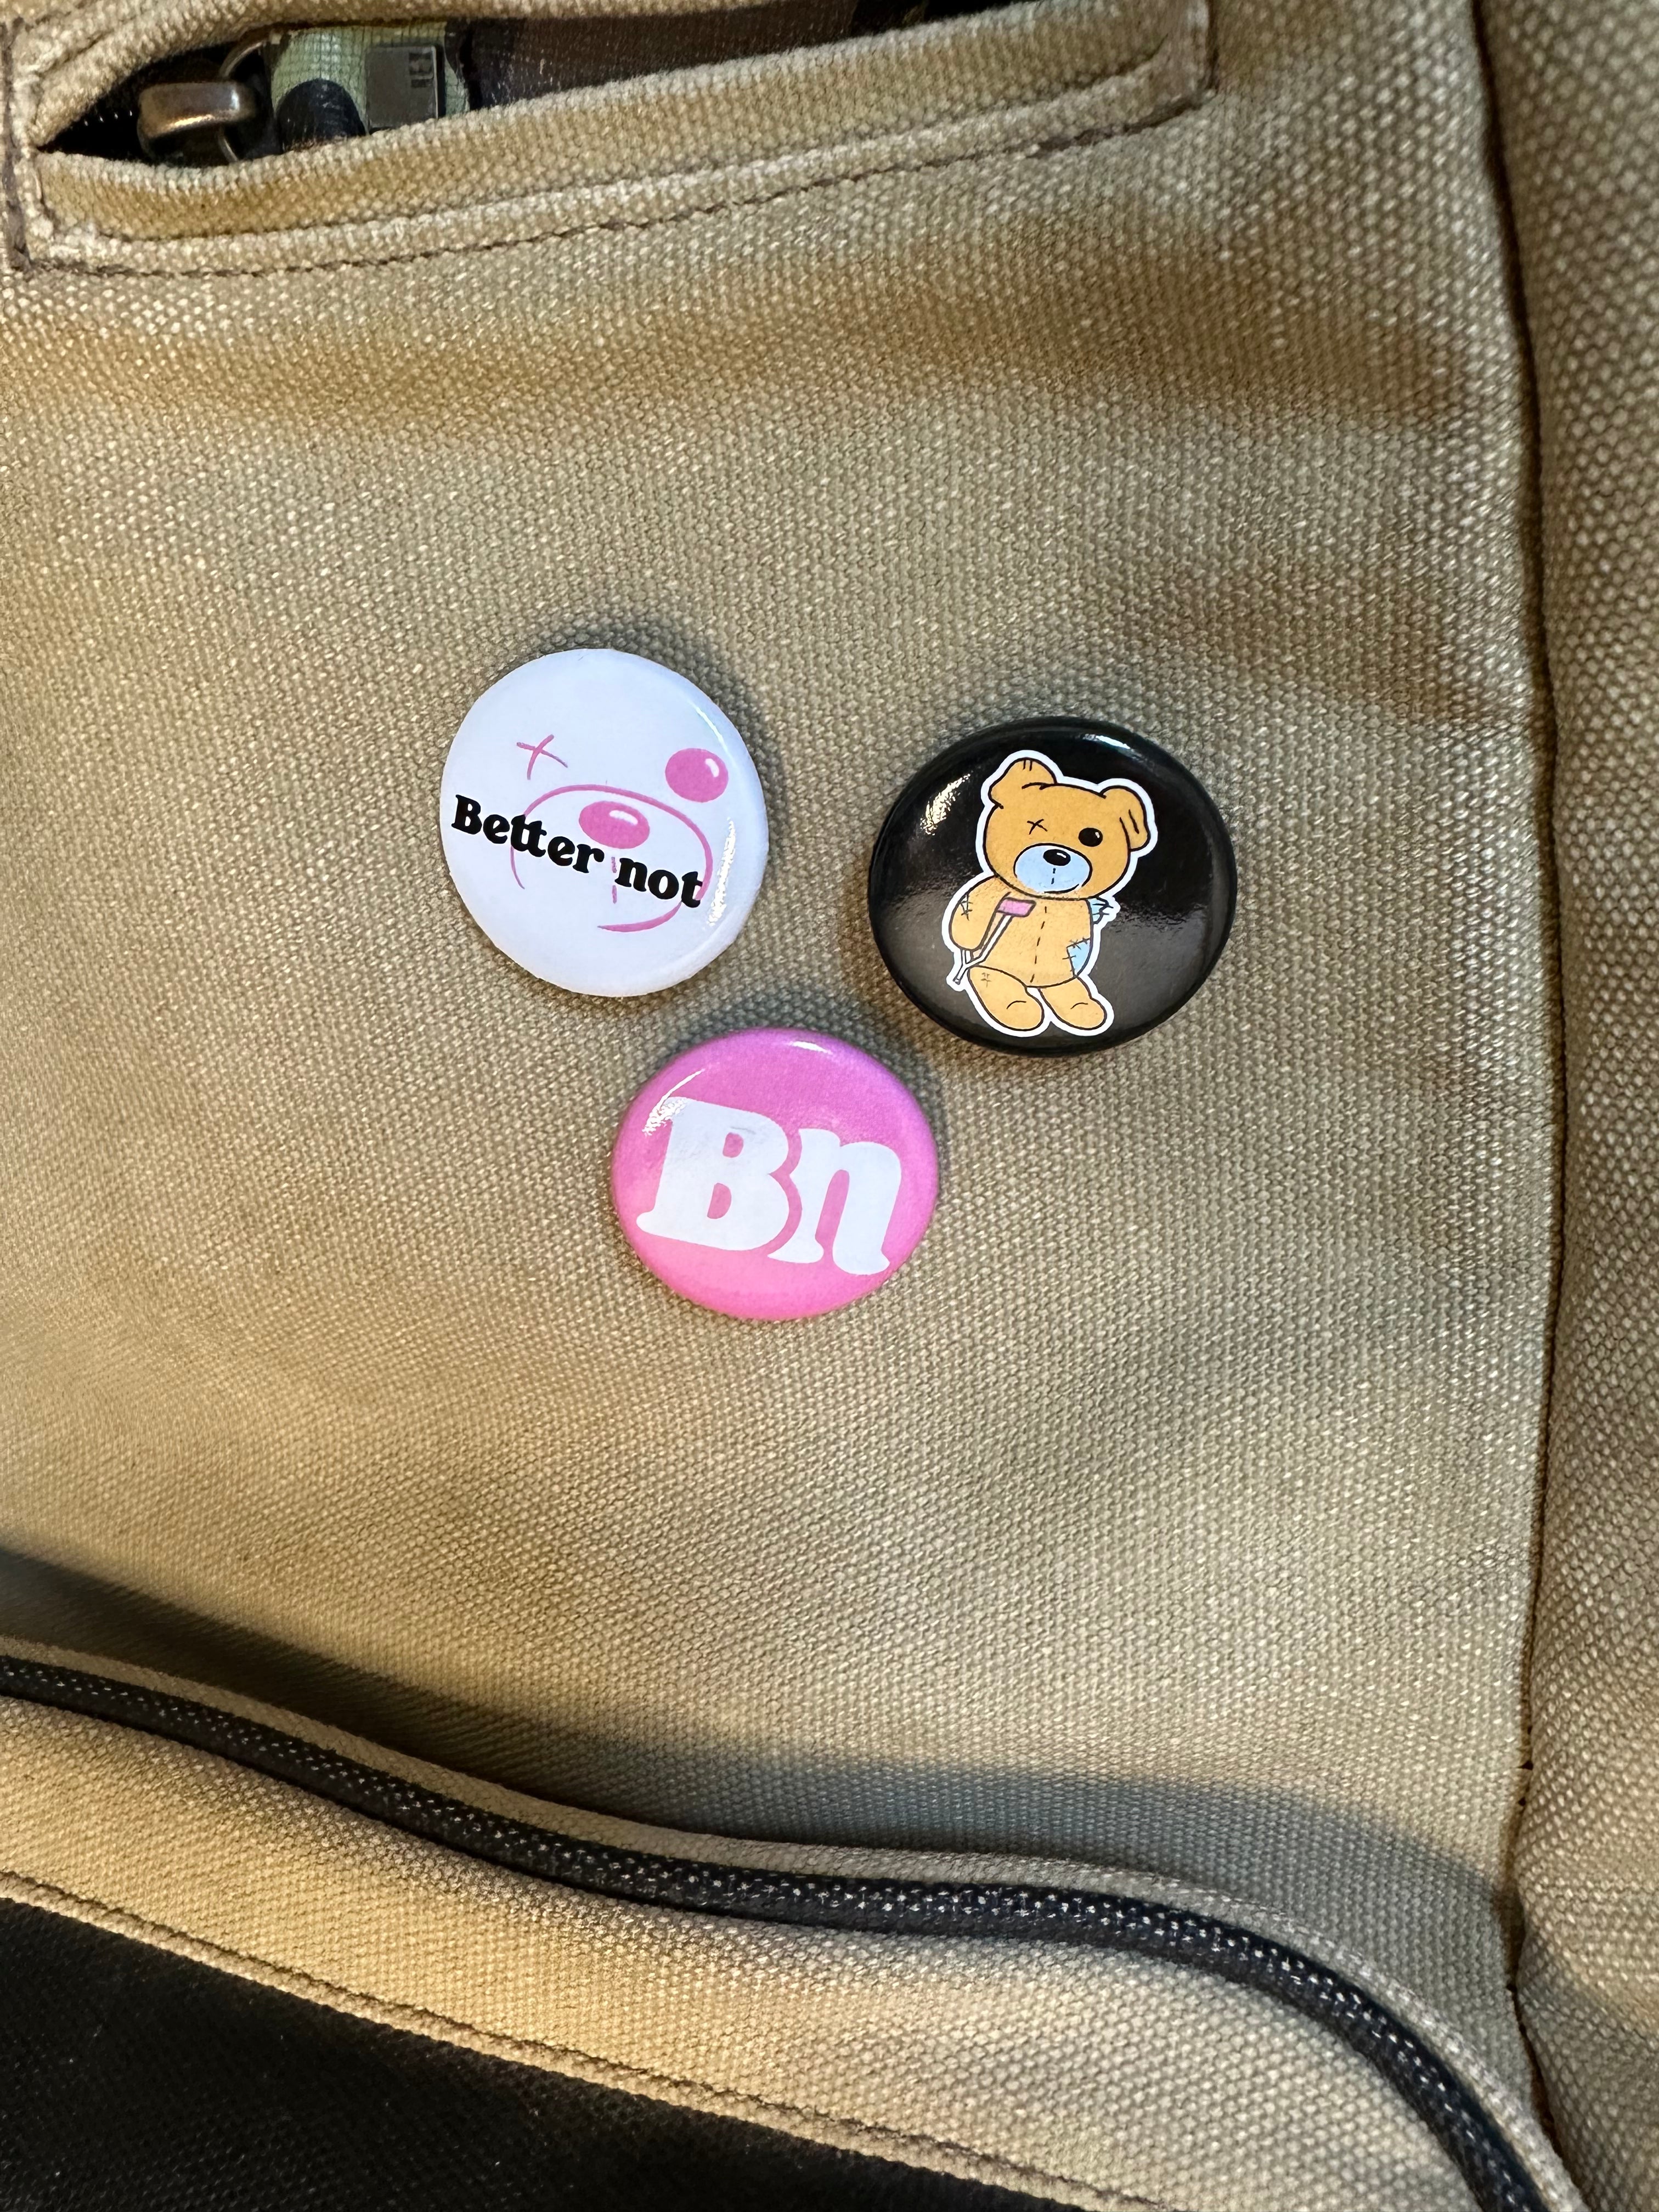 Three 3-Pack Pins on a khaki backpack: white pin with "Better not" and a pink face, black pin with a cute teddy bear, and a pink pin with "bn